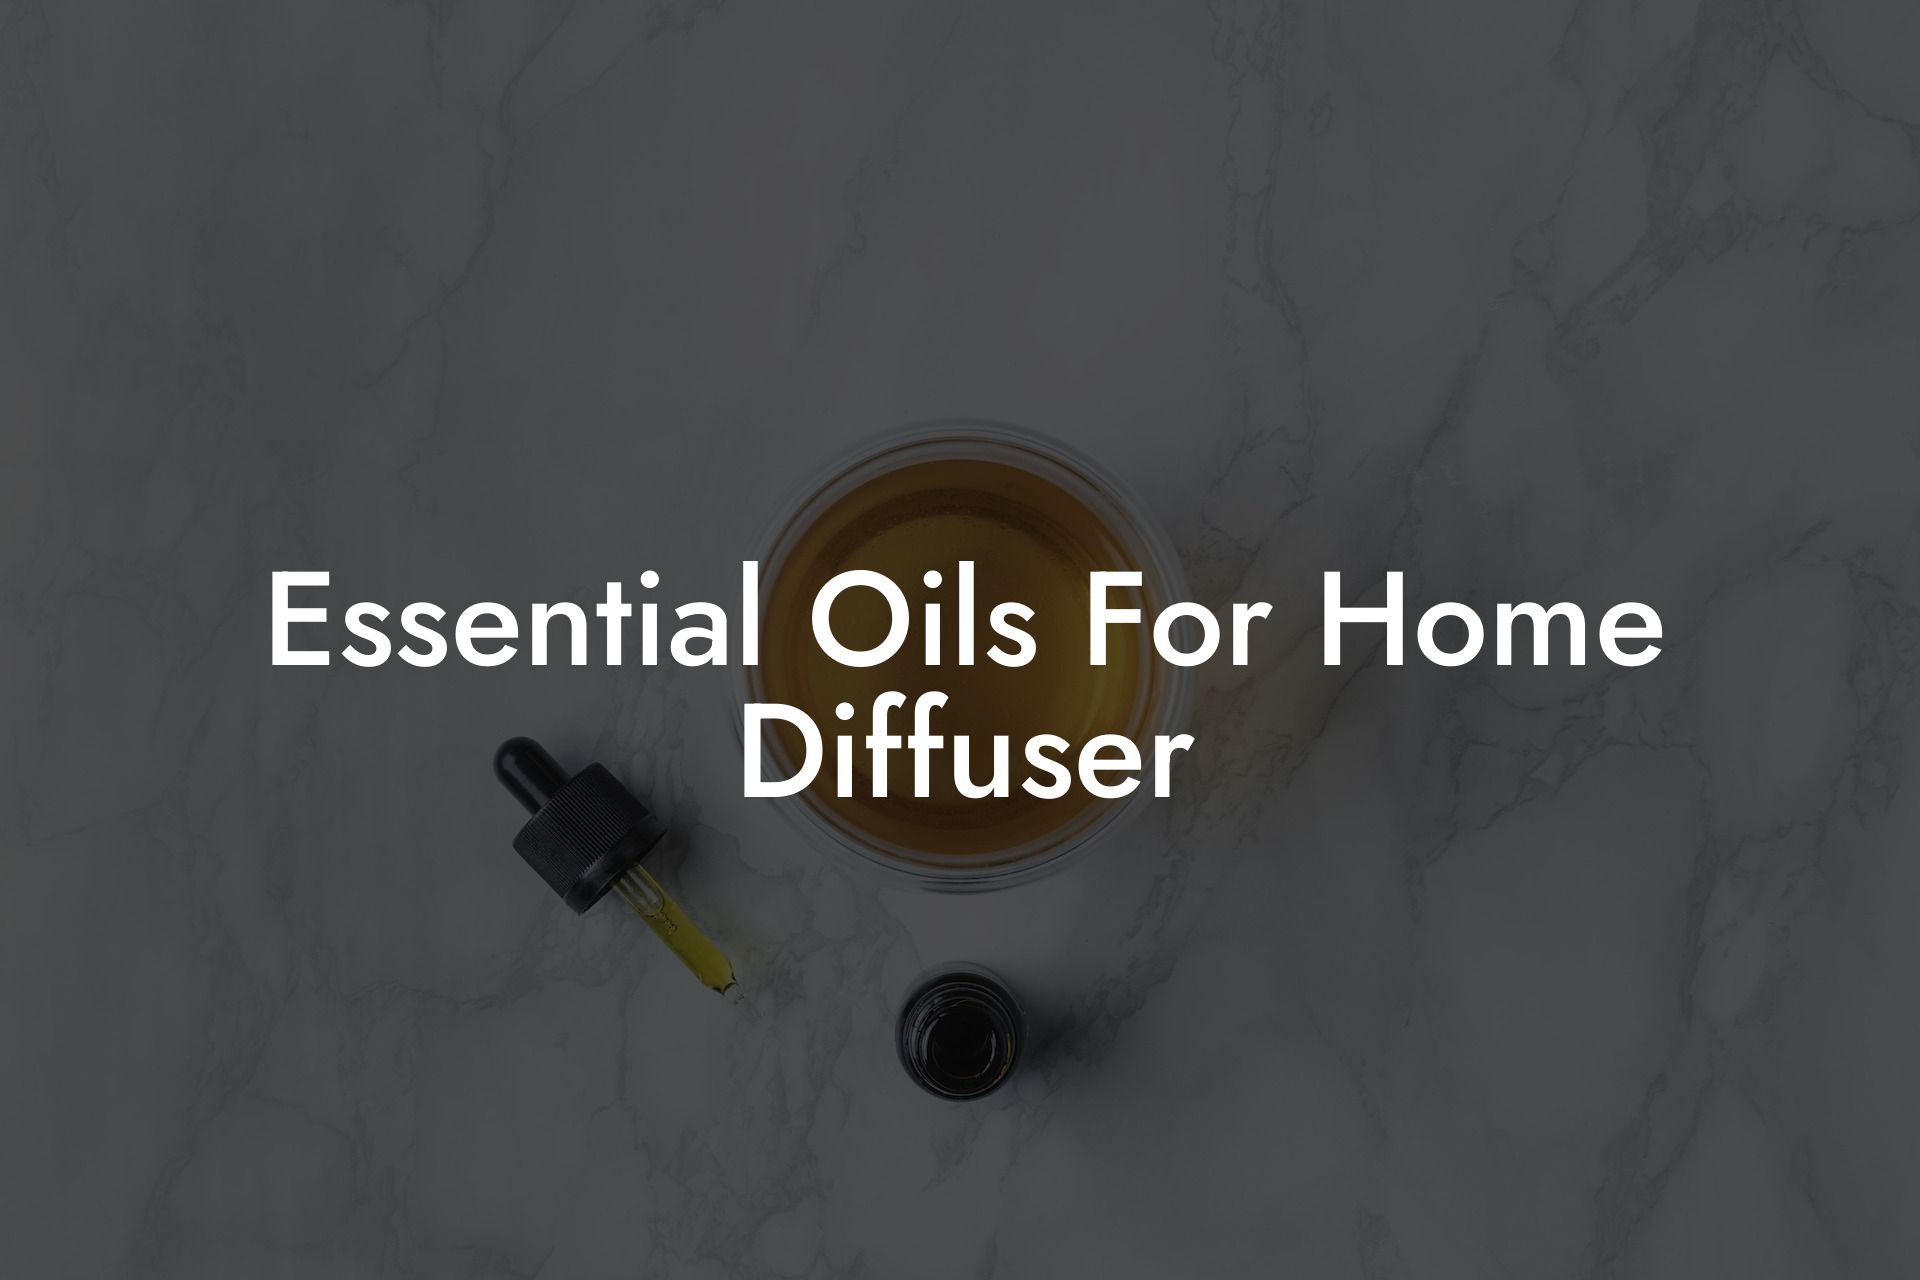 Essential Oils For Home Diffuser